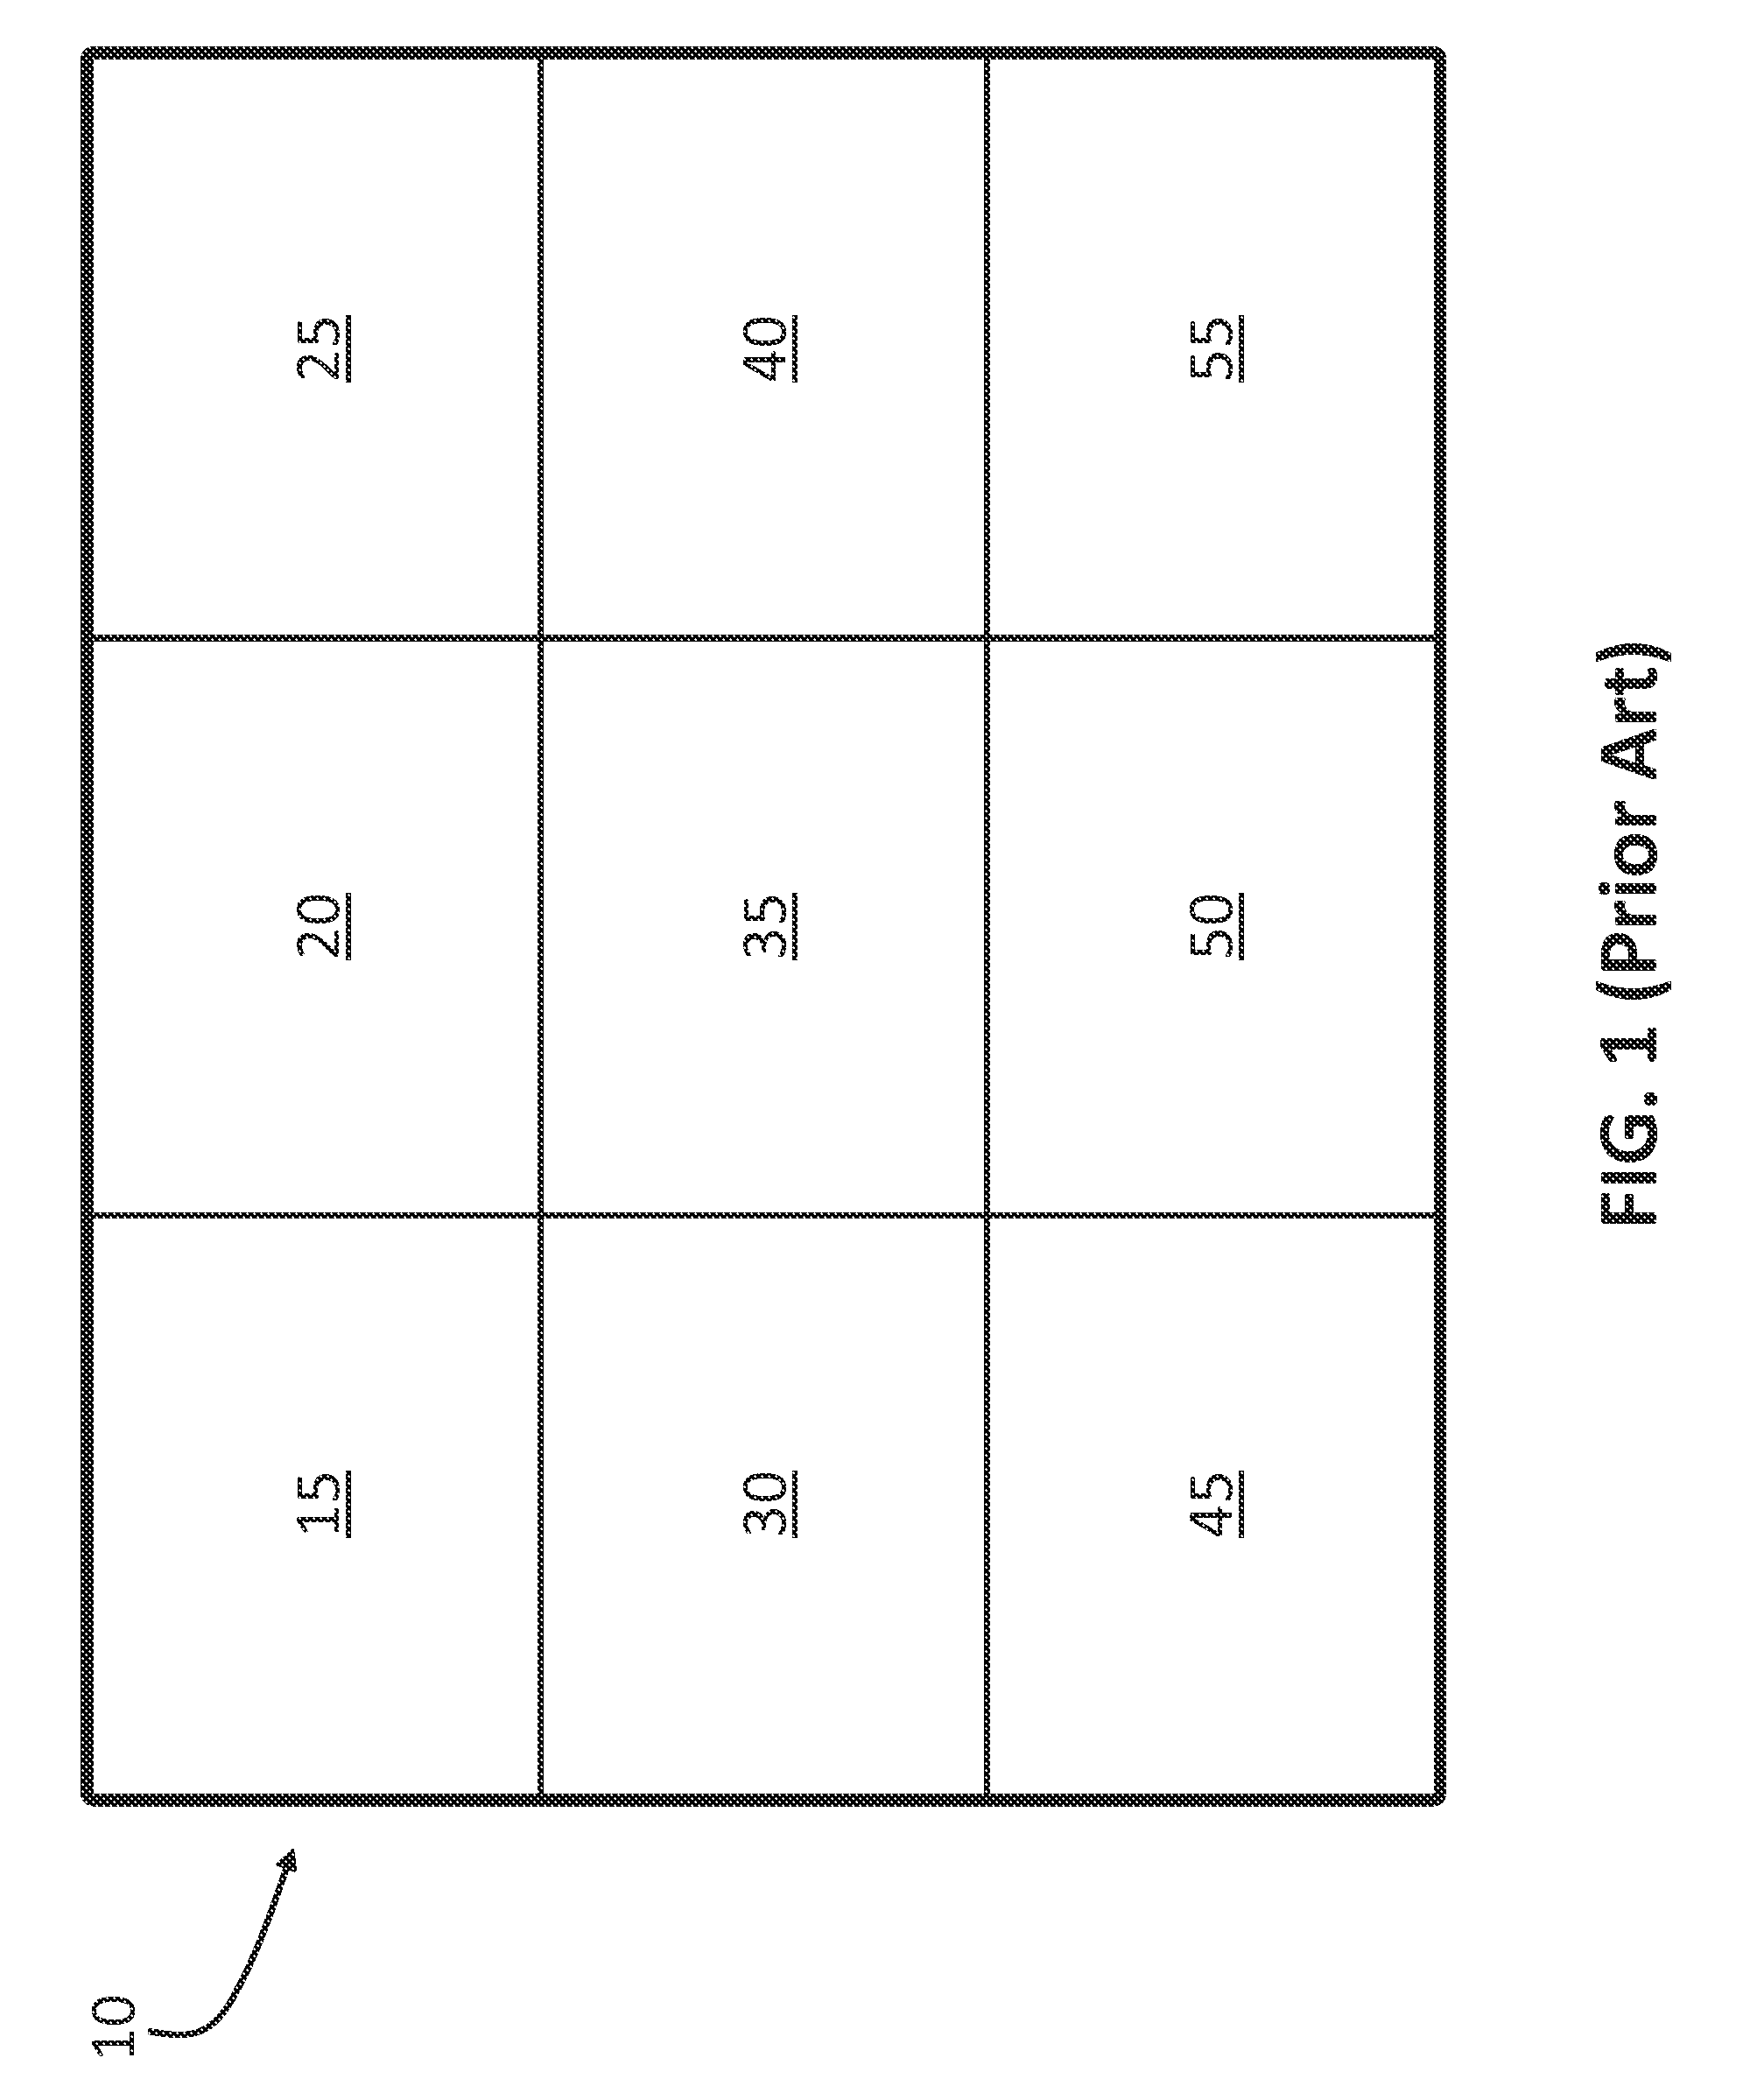 Apparatus and Method to Measure Display Quality